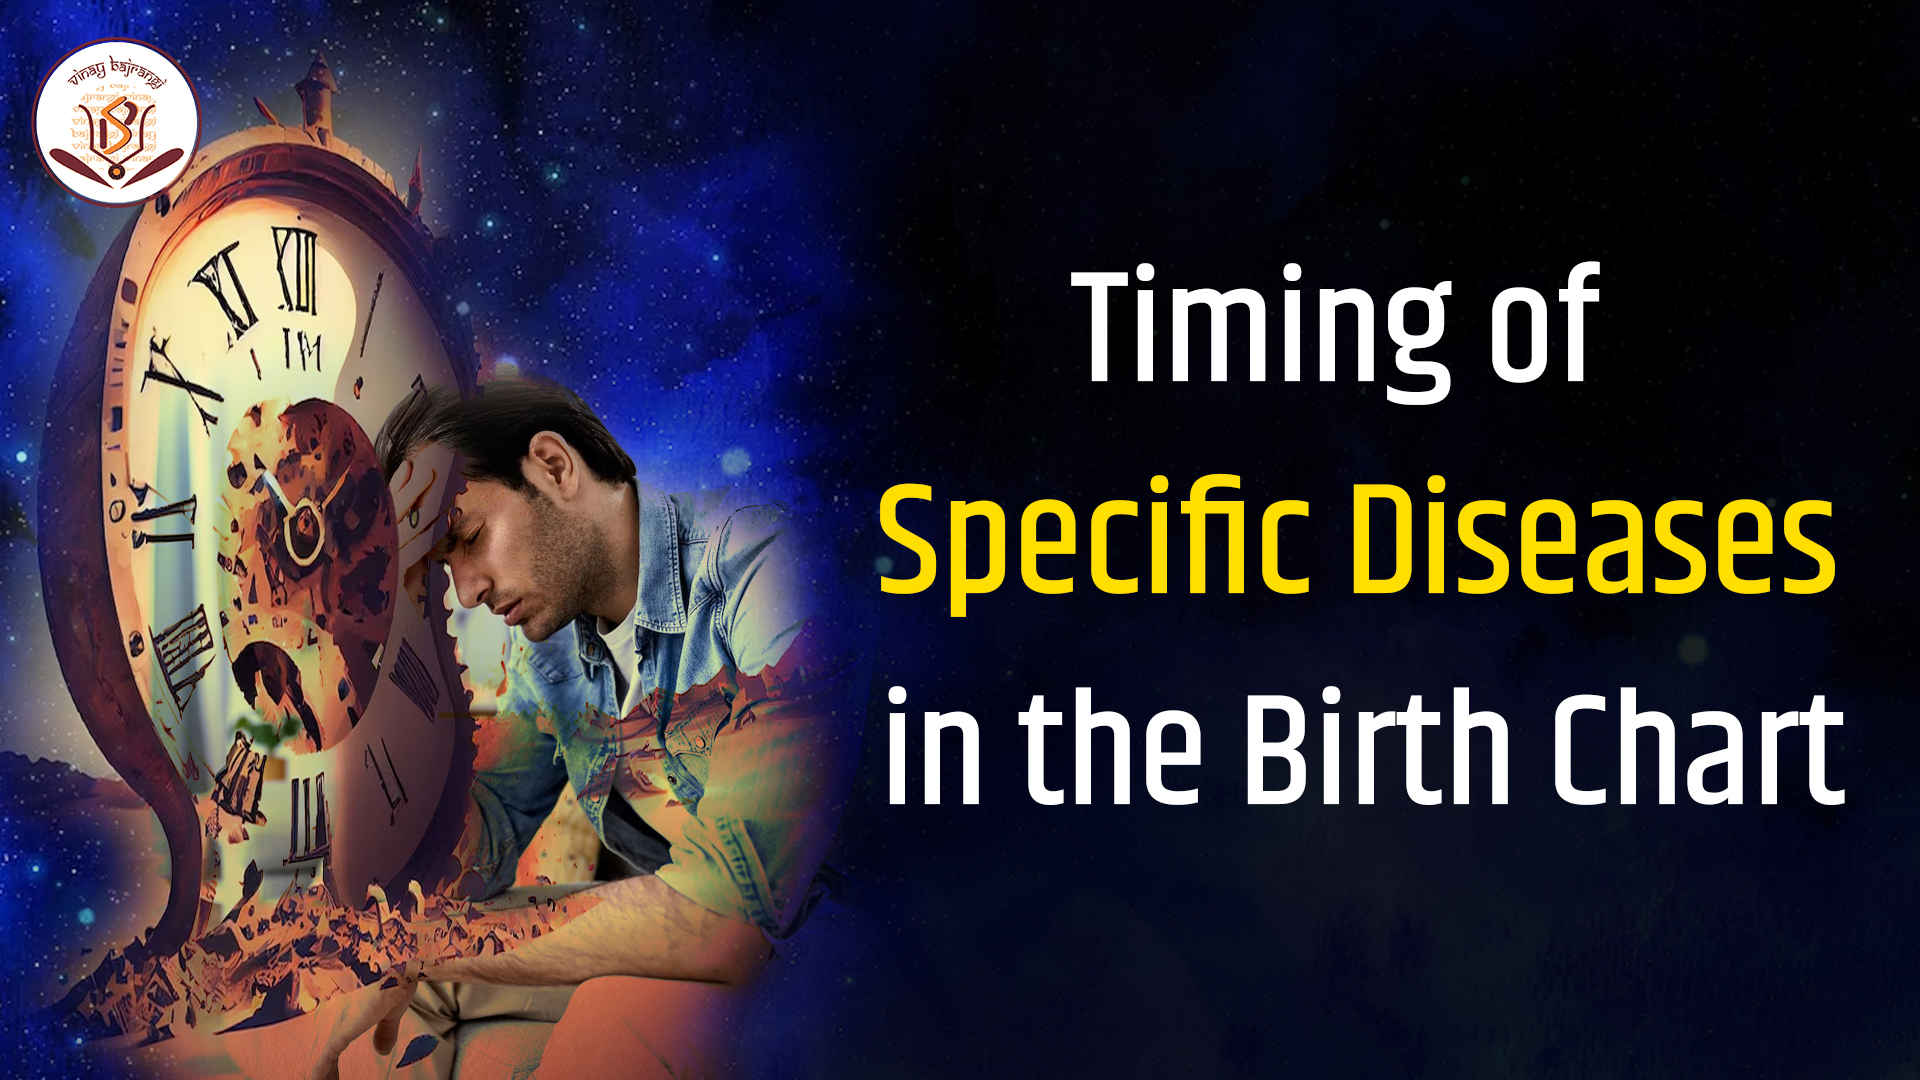 Timing of Specific Diseases in the Birth Chart